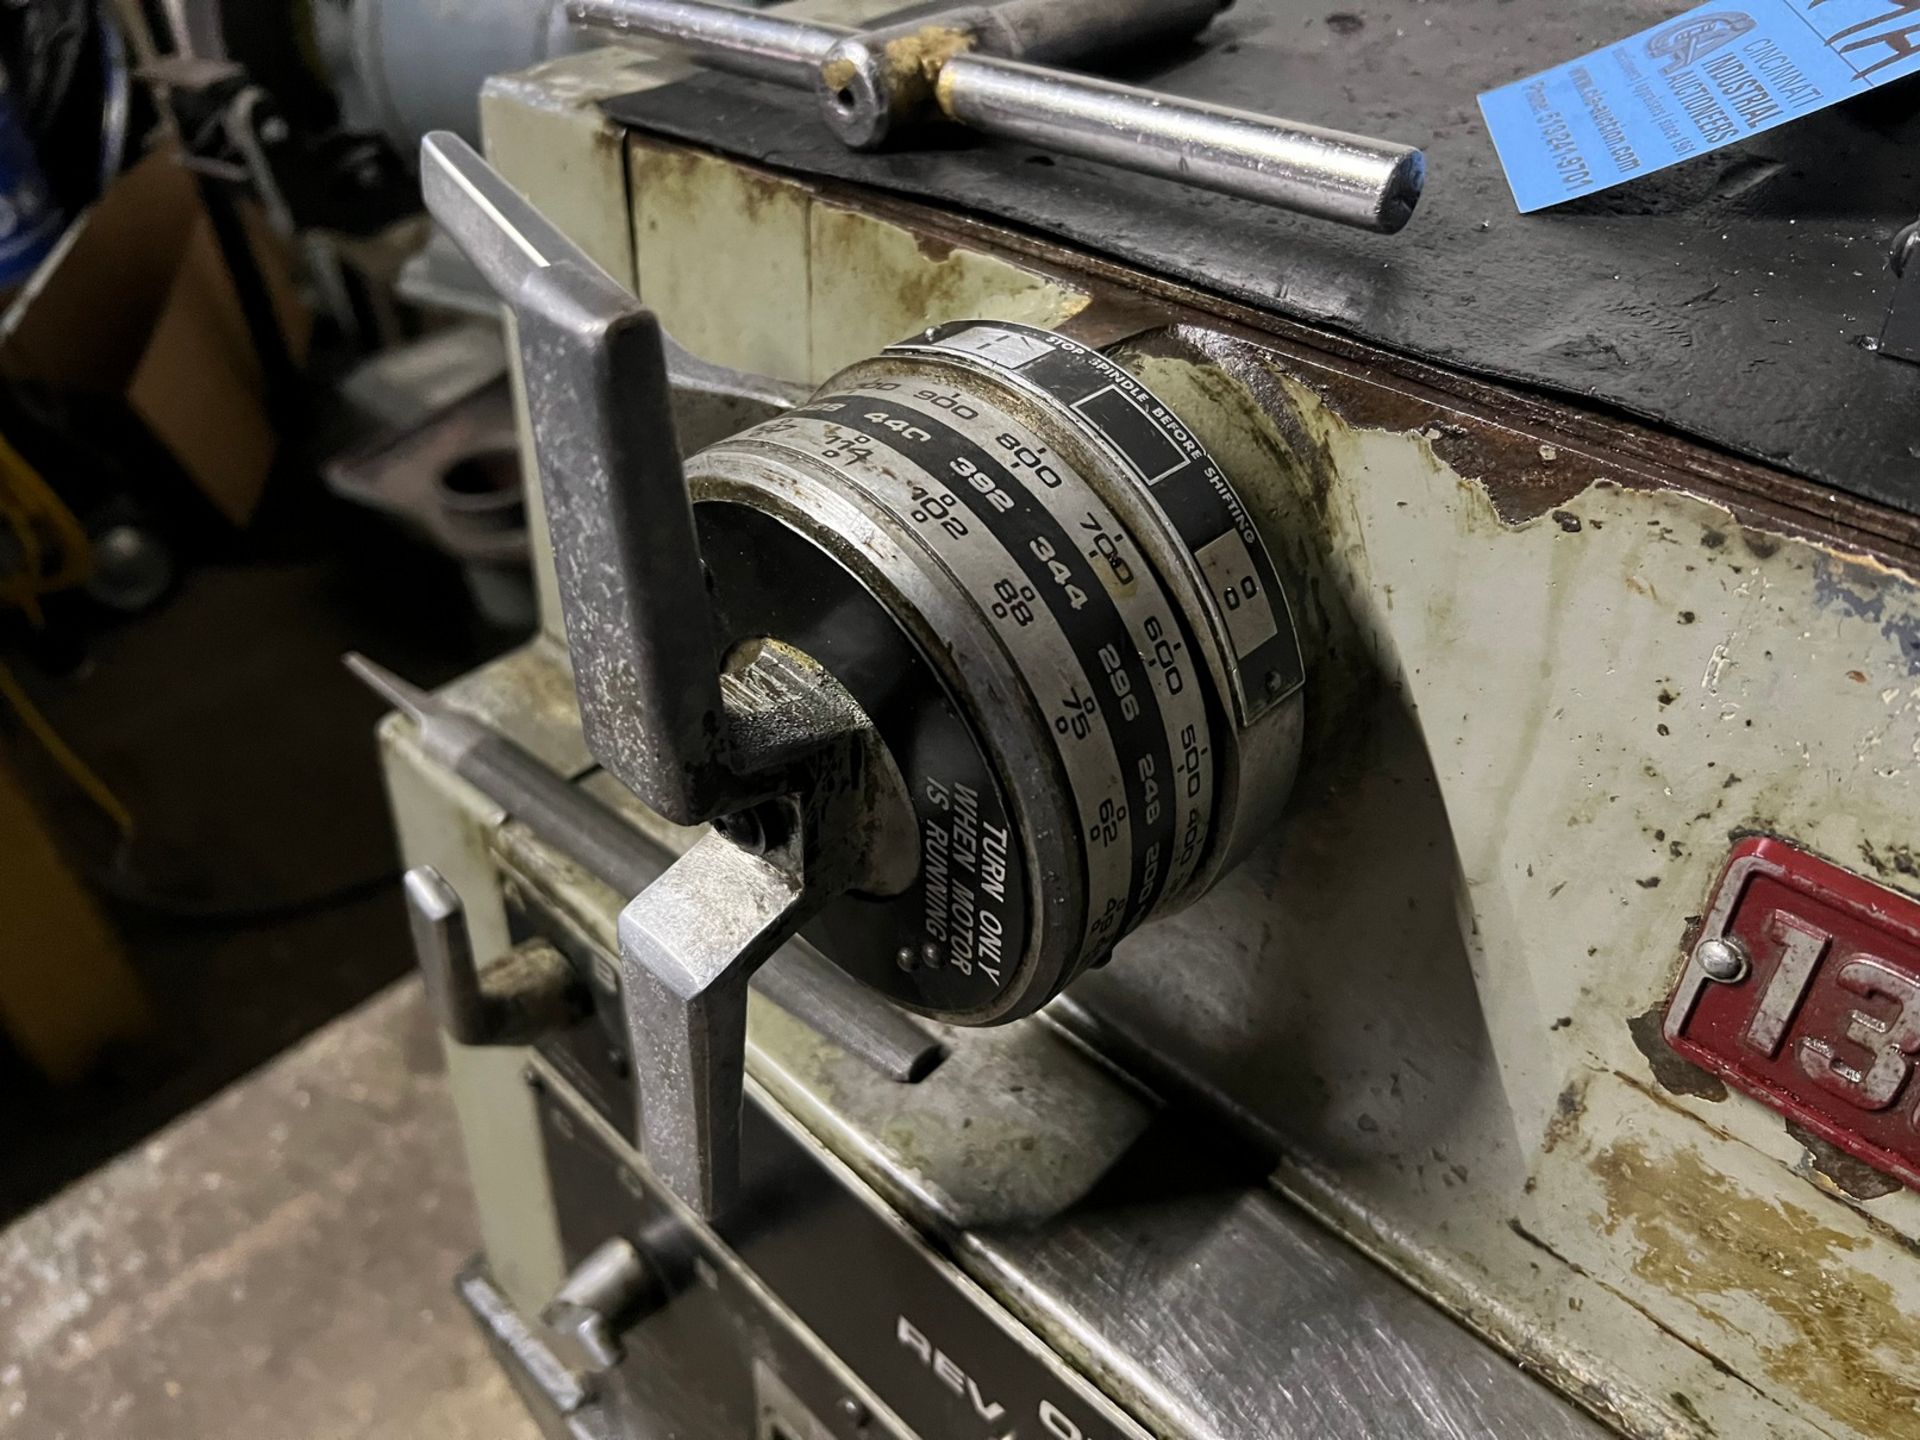 13" X 30" CLAUSING MODEL 1300 TURRET LATHE; S/N 130203, 8" THREE-JAW CHUCK**For convenience, a - Image 9 of 11